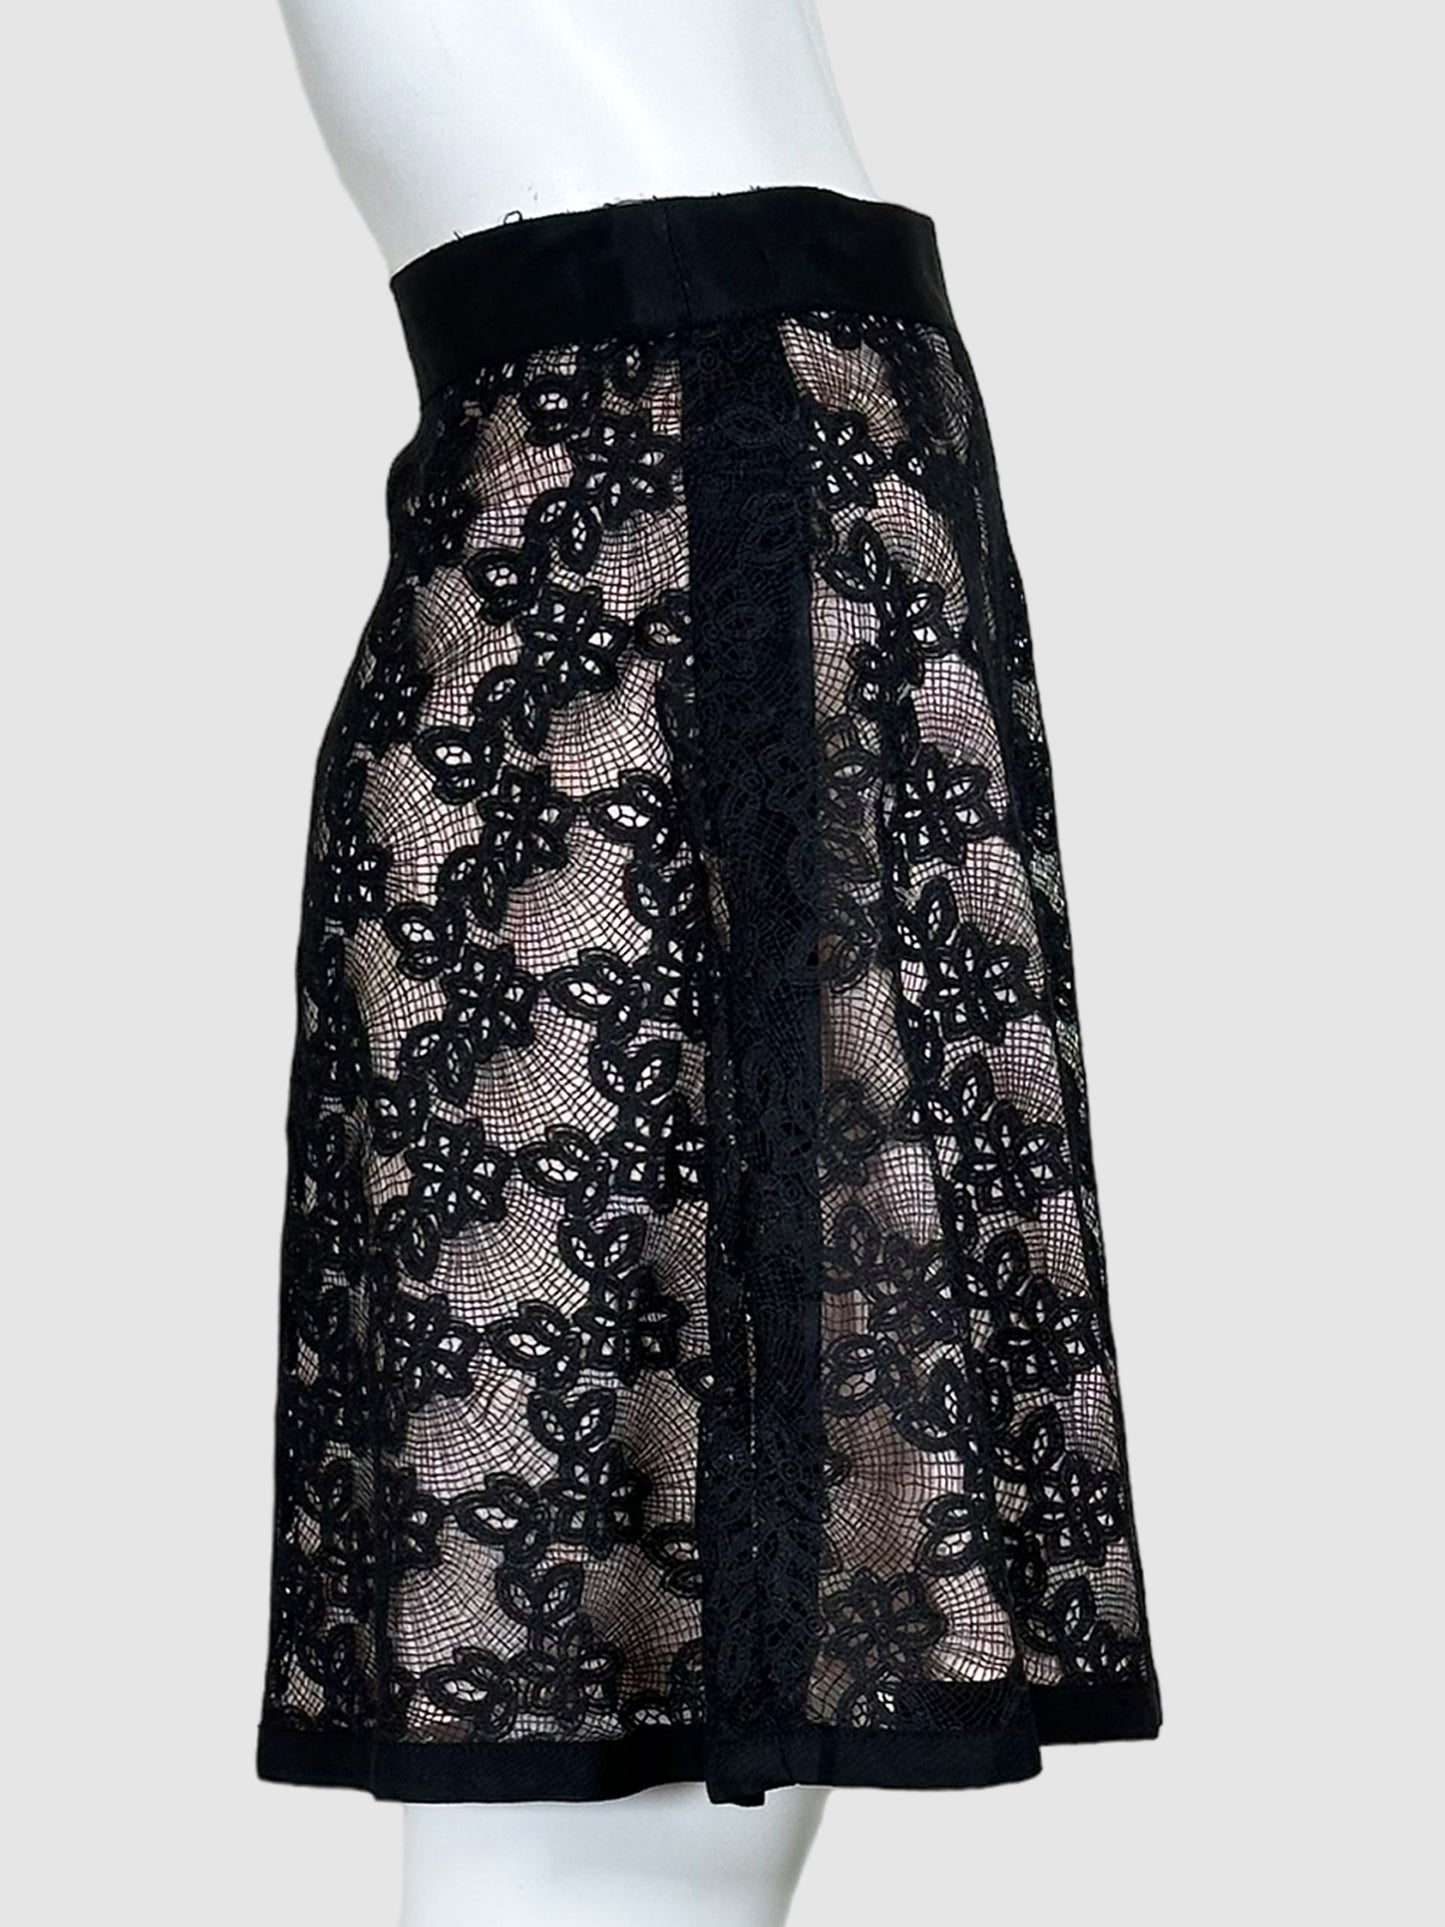 Floral Lace Skirt - Size 2